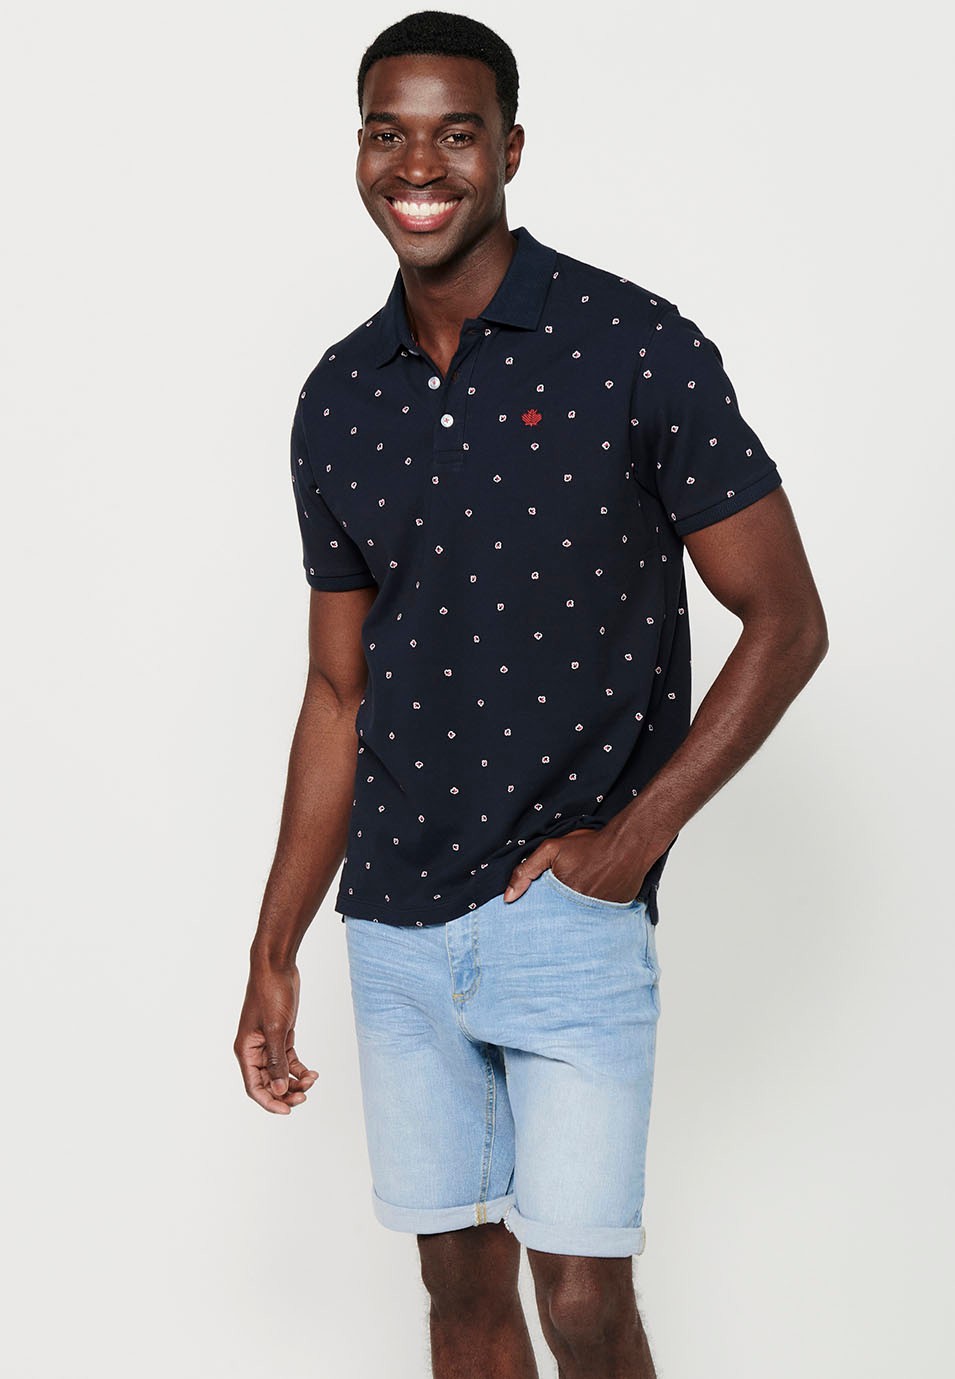 Short-sleeved polo shirt, navy printed fabric for men